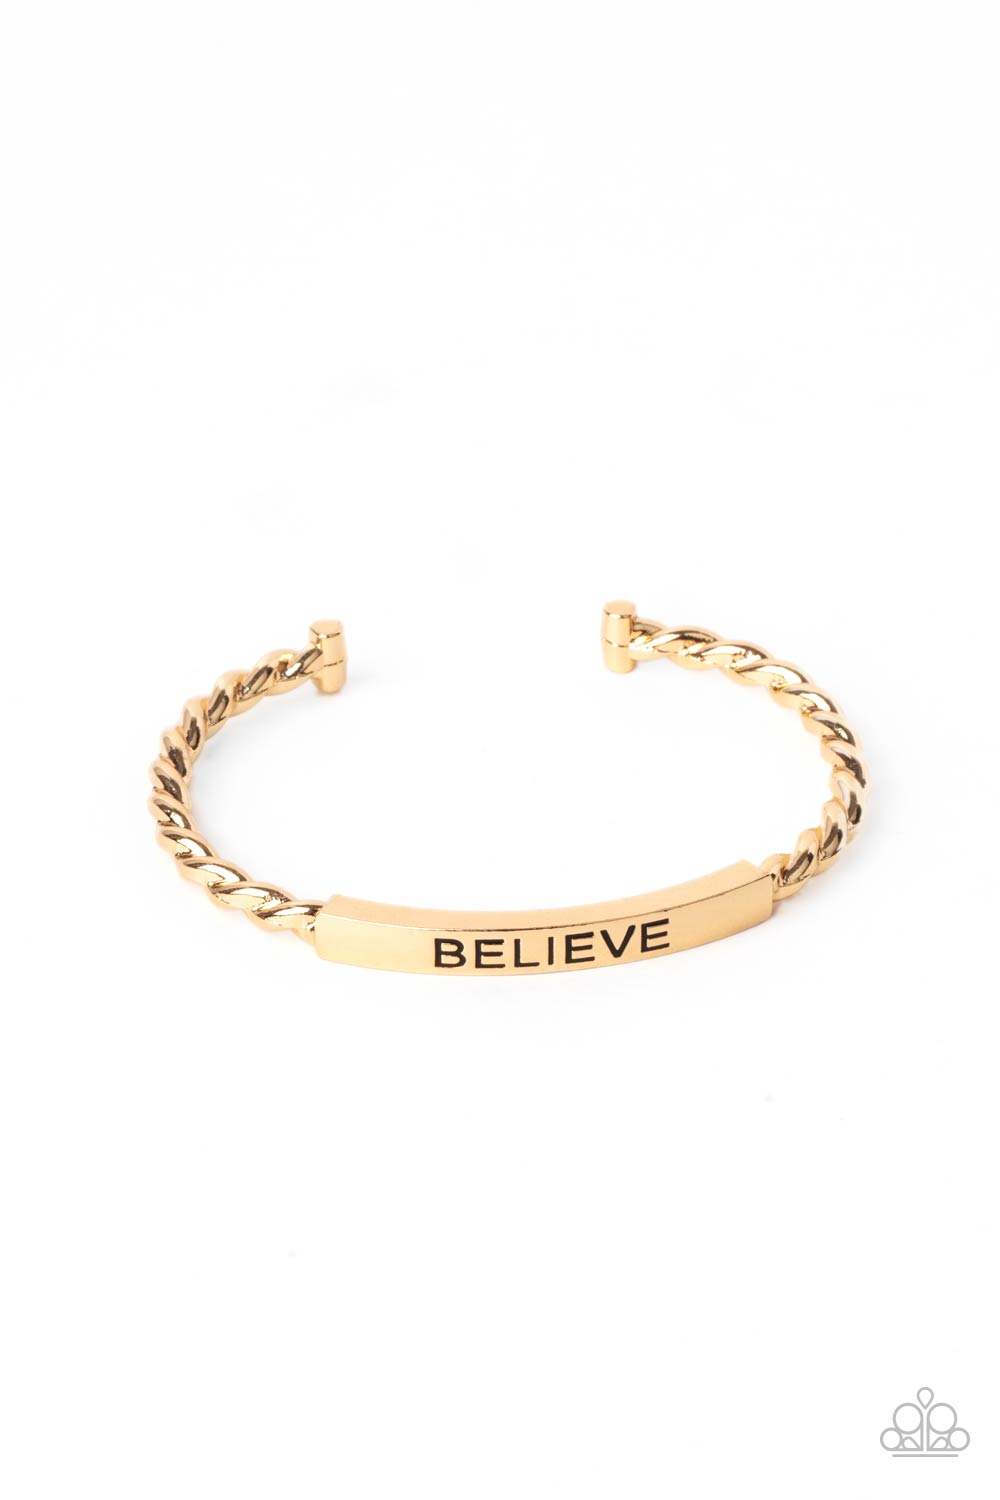 Keep Calm and Believe - Gold | Inspirational 